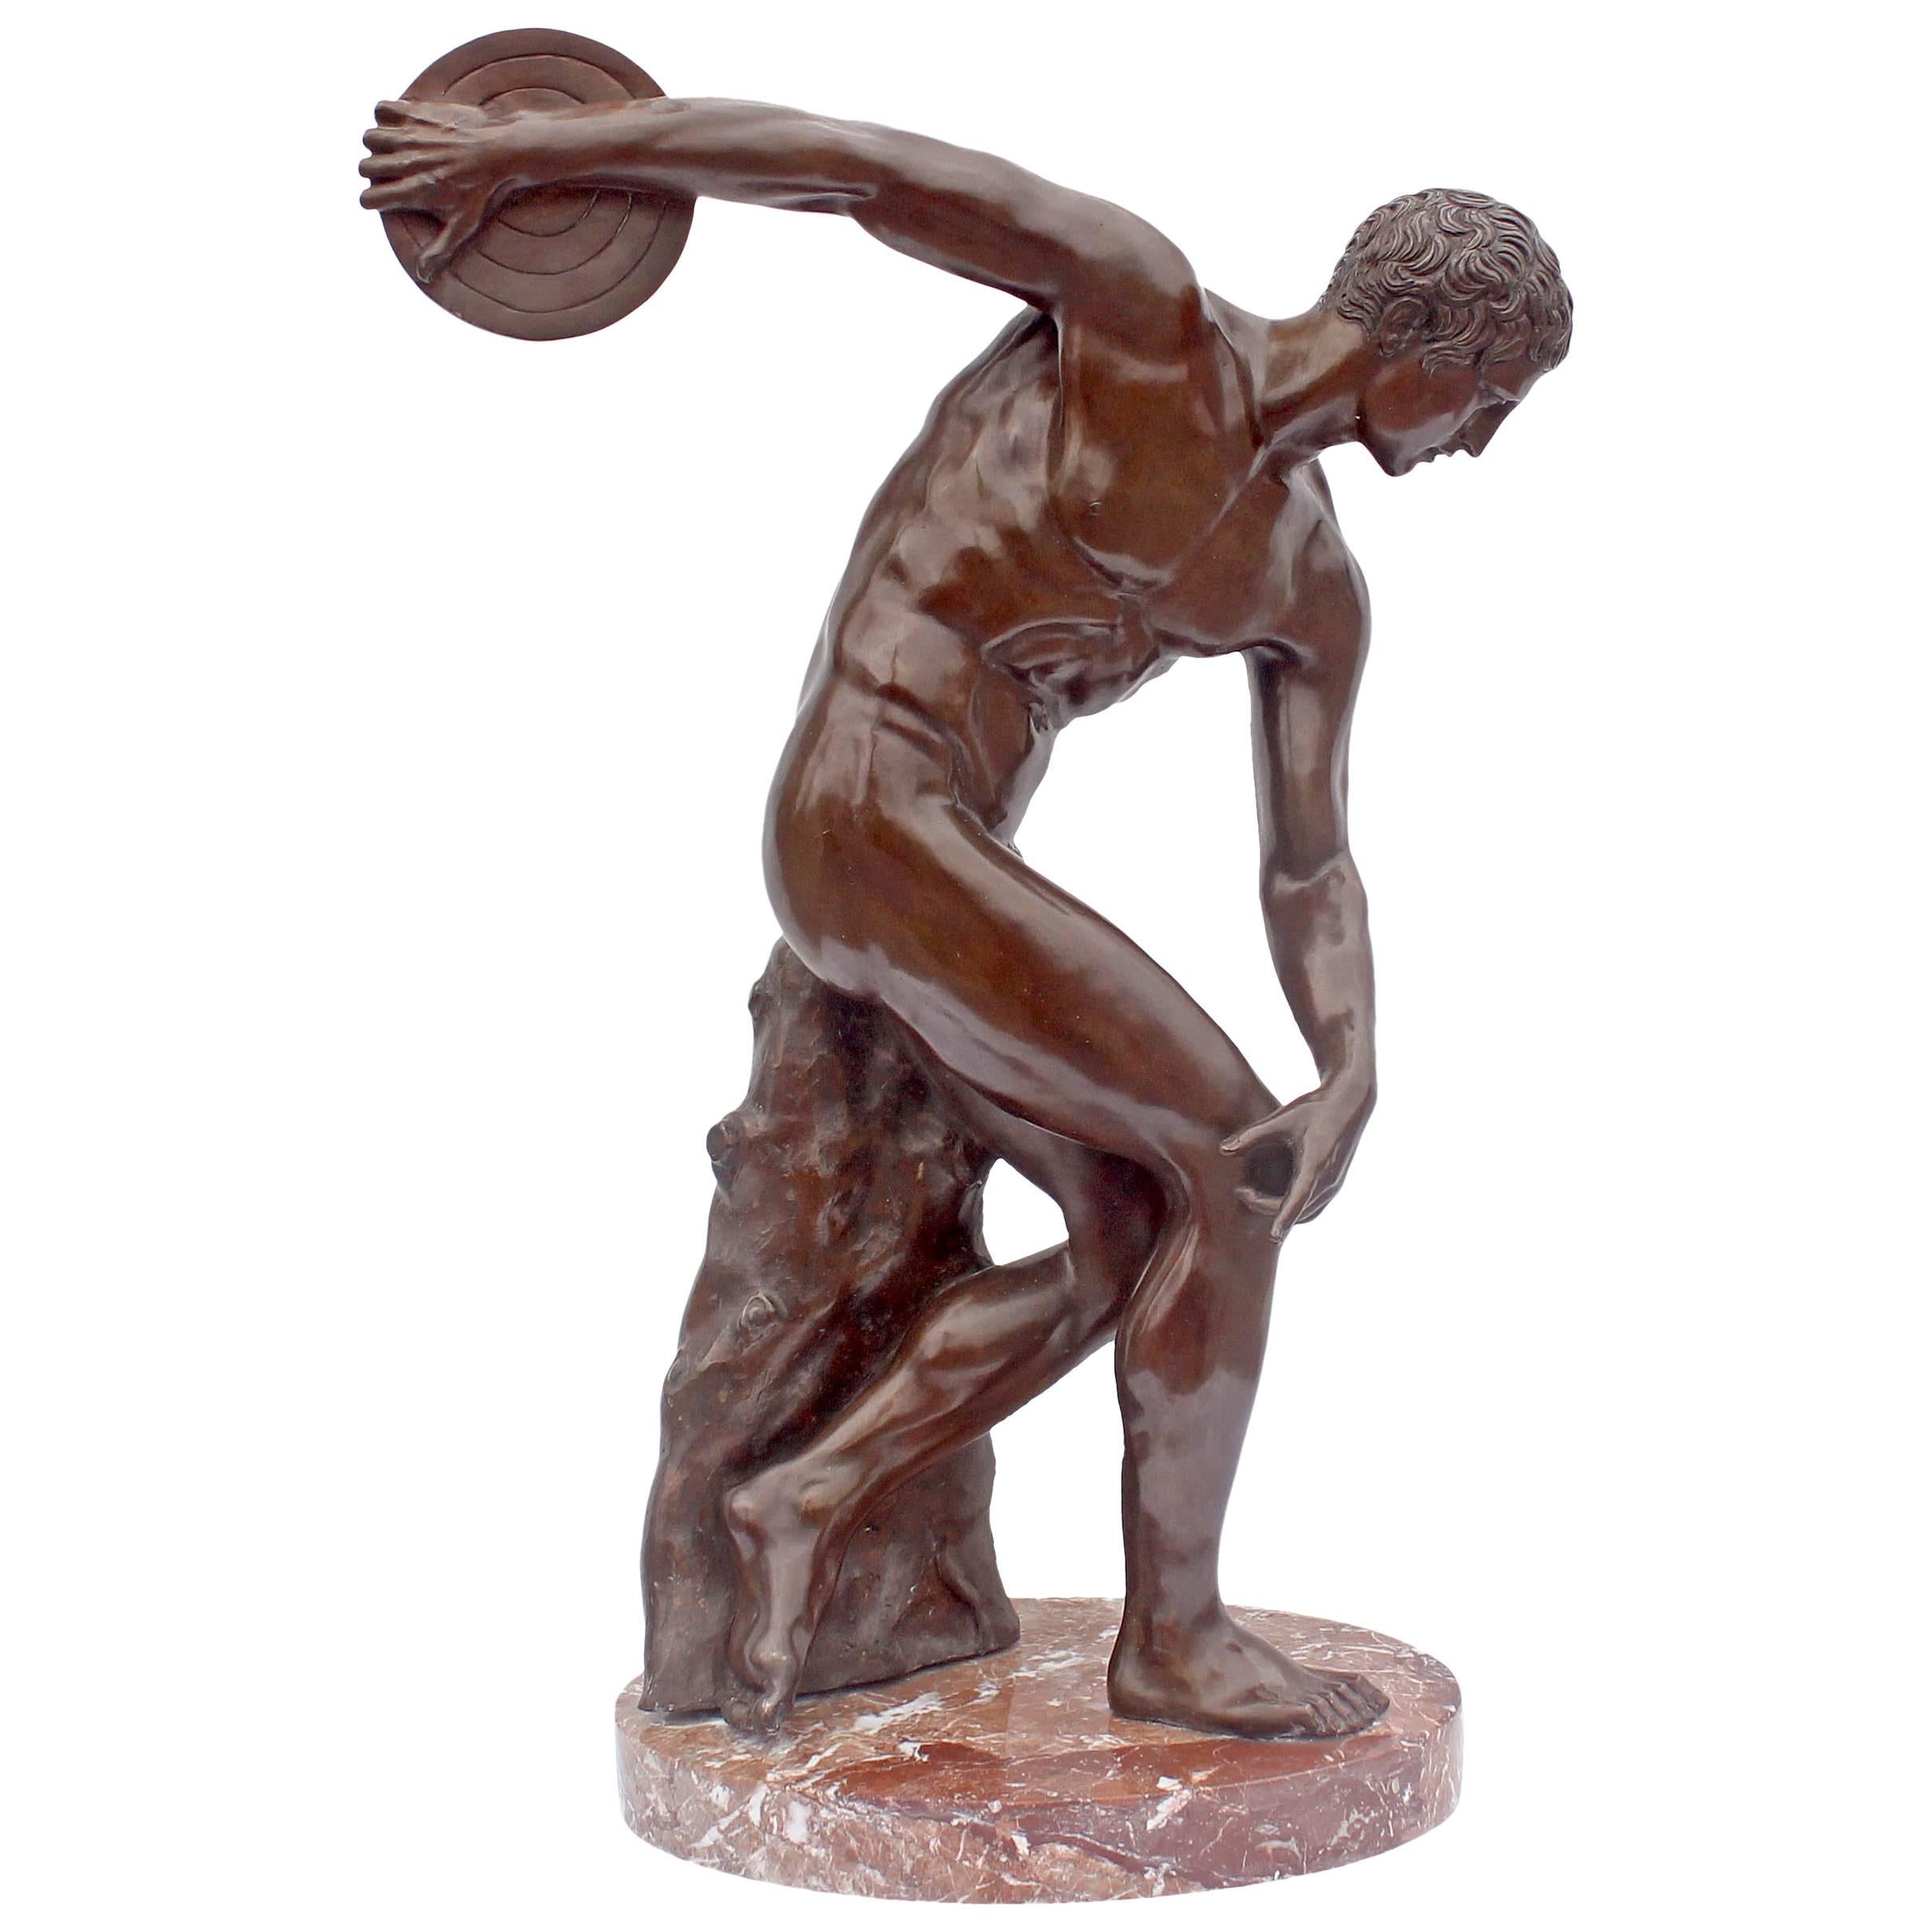 Large Bronze Sculpture "The Discus Thrower"